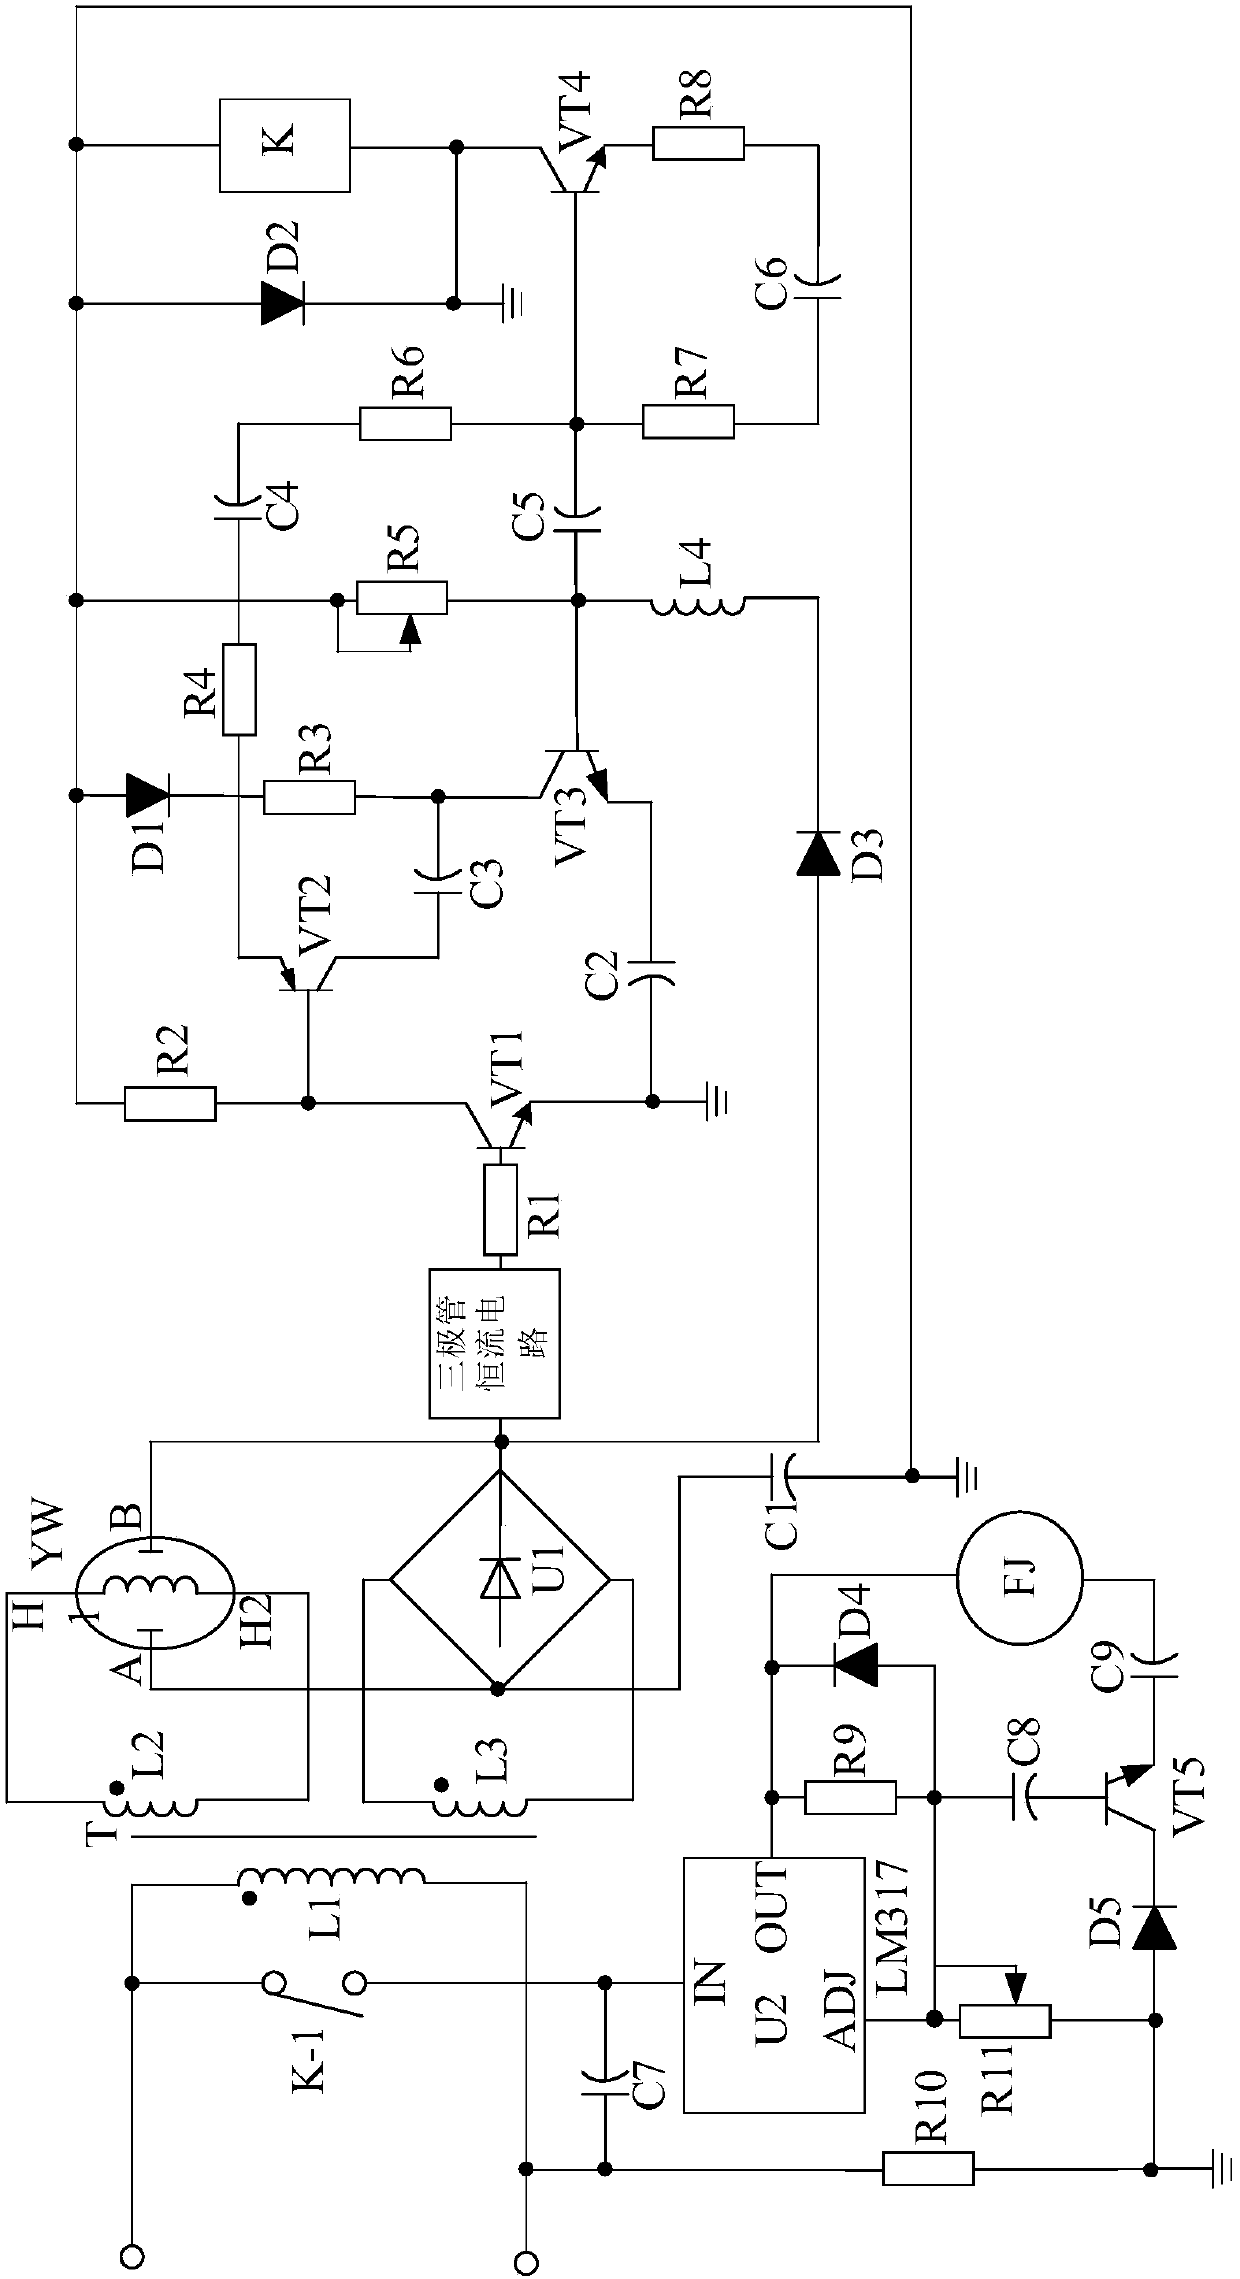 Voltage constant-current adjustment type control system for air-purifying ventilation fan